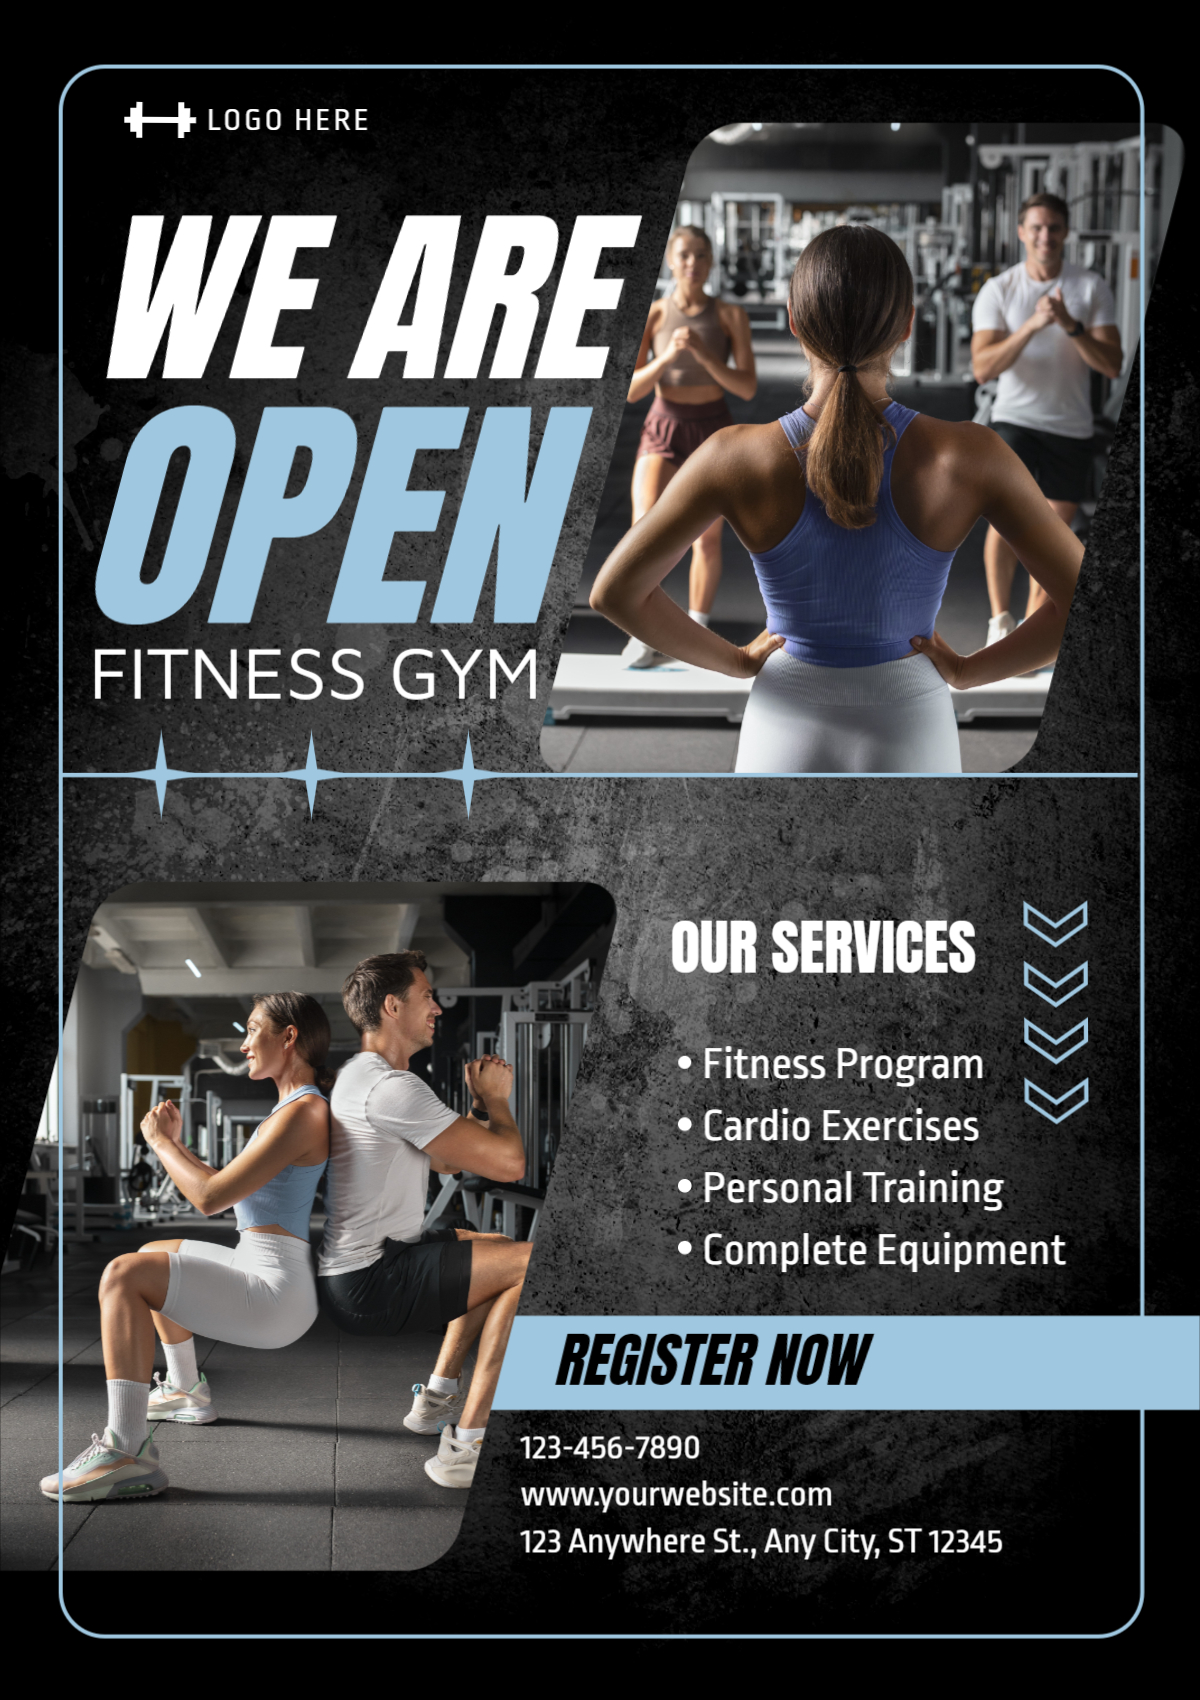 Fitness Gym poster design download for free